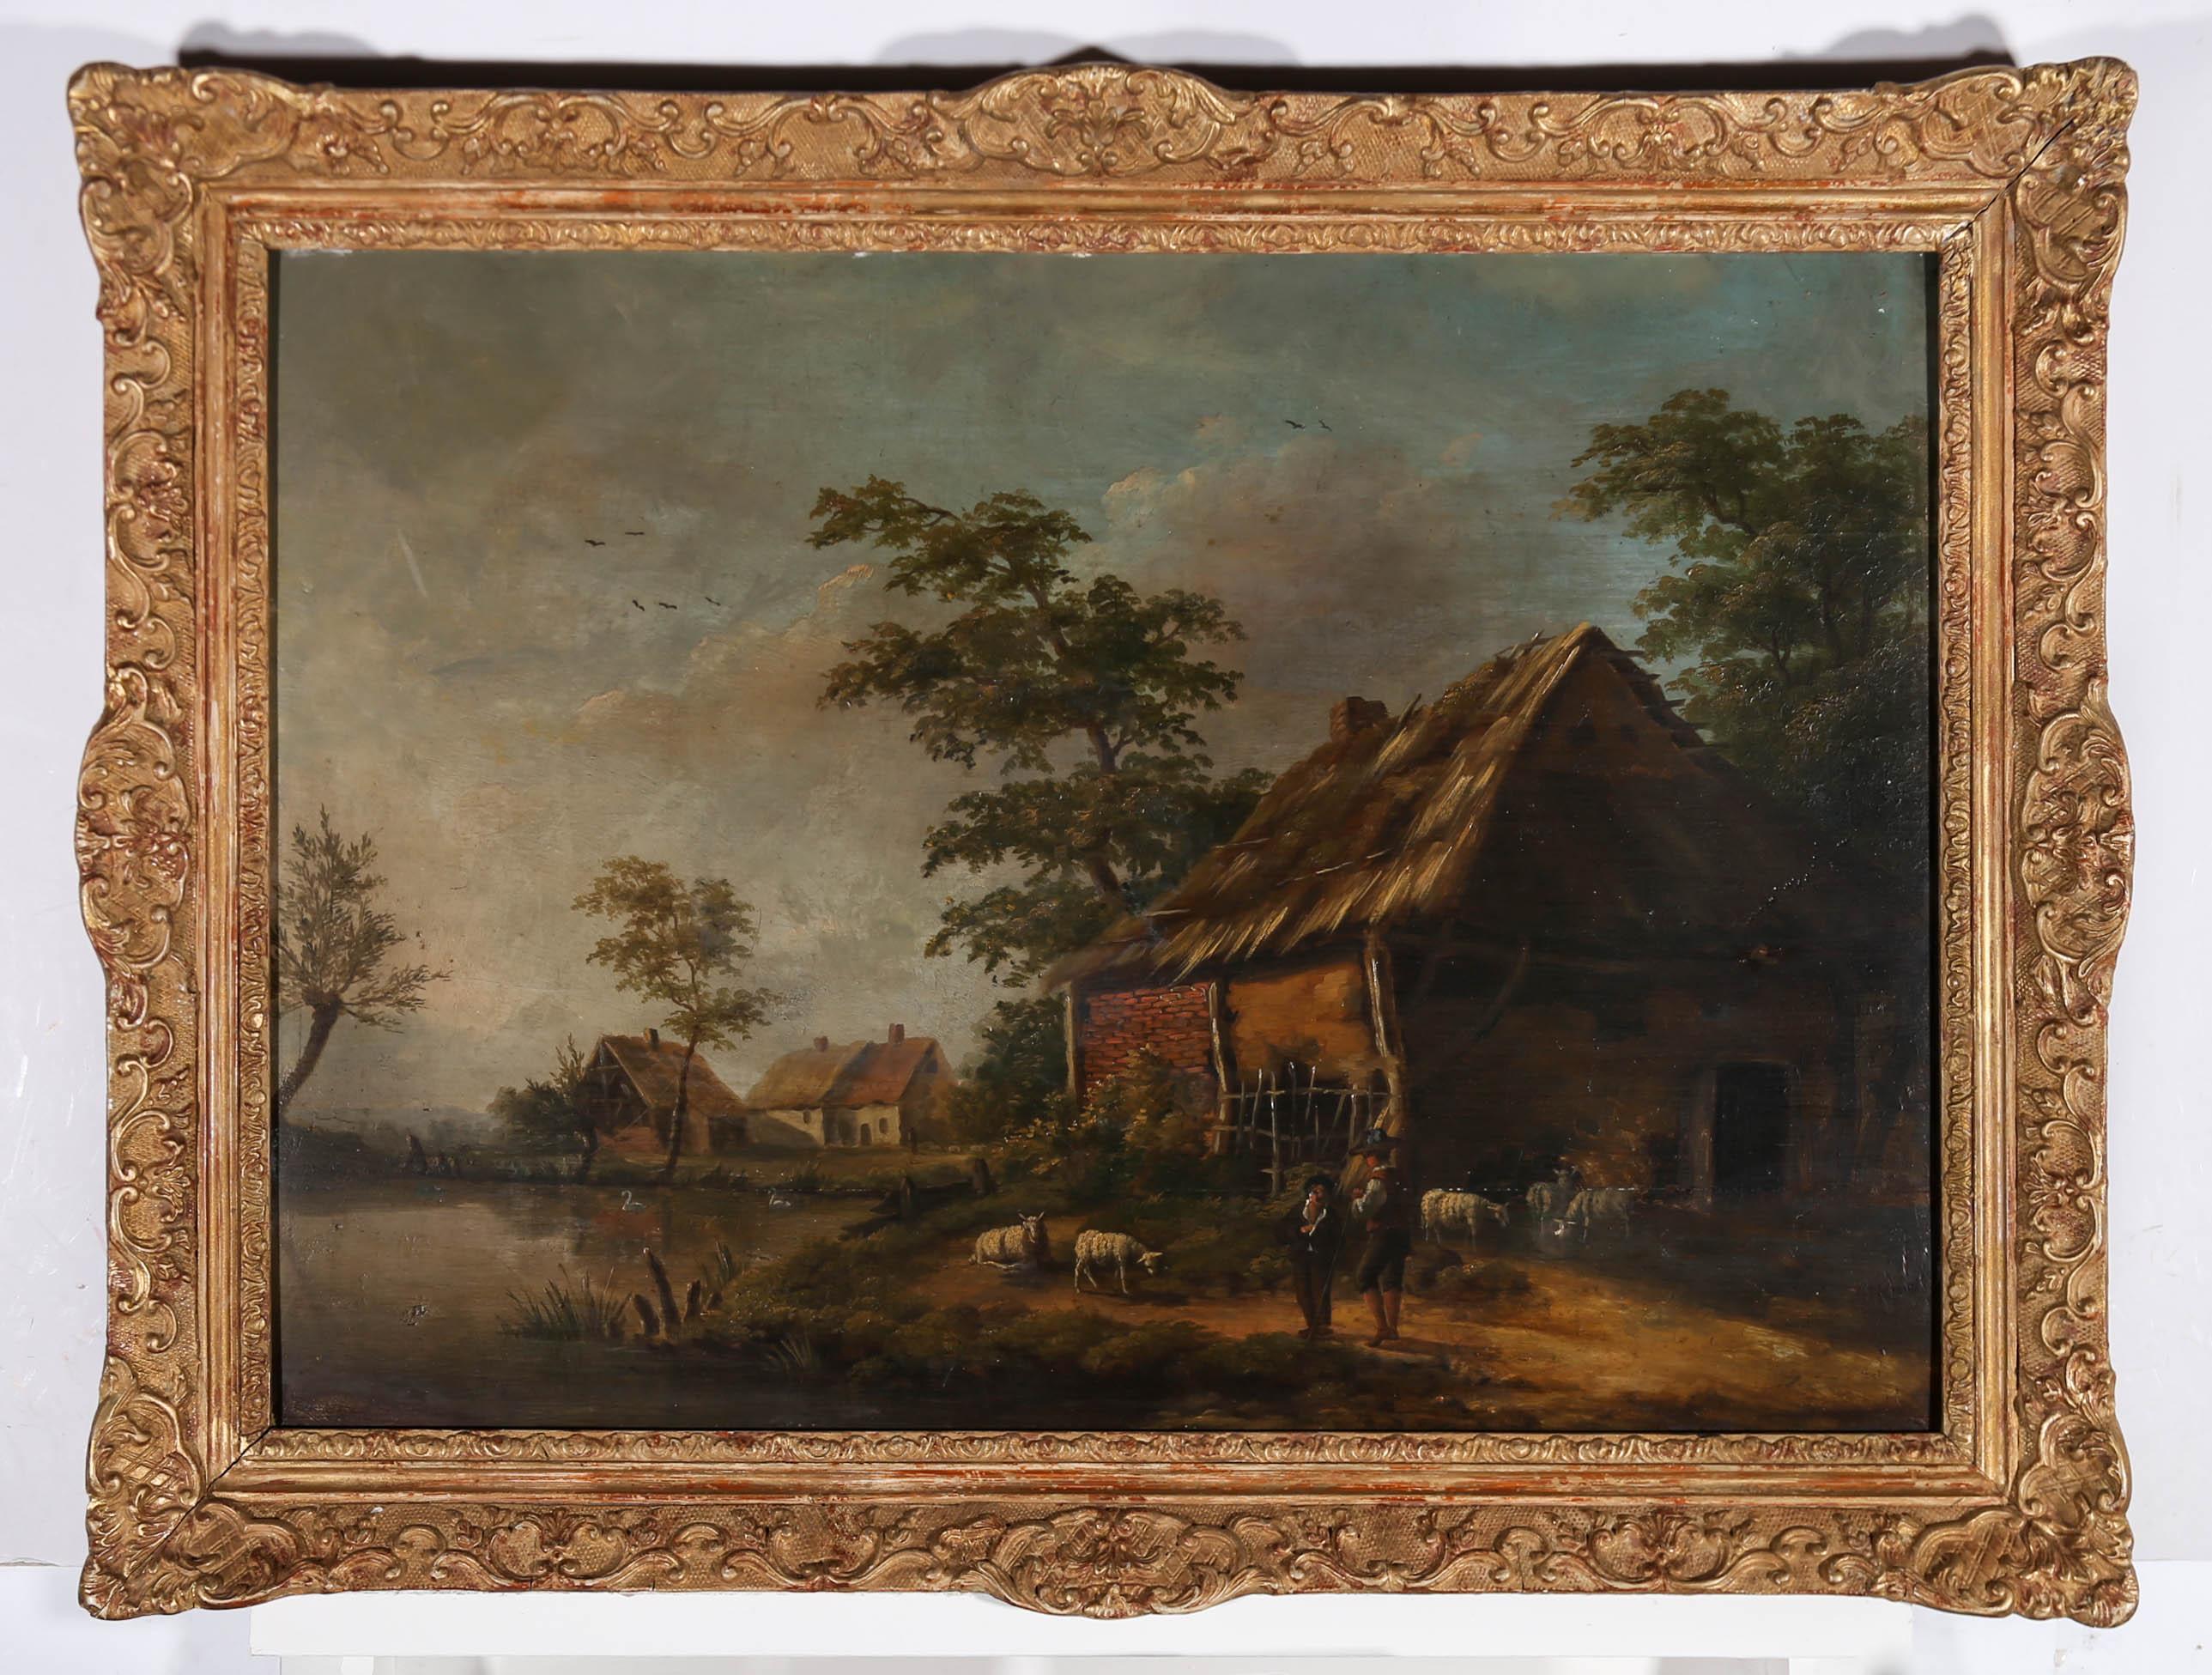 A fine example of a 19th century Dutch school landscape scene. The picture depicts two farmers in conversation beside a lake with a small herd of sheep around them. the scene looks over the rest of the farm with thatched barns and a cottage